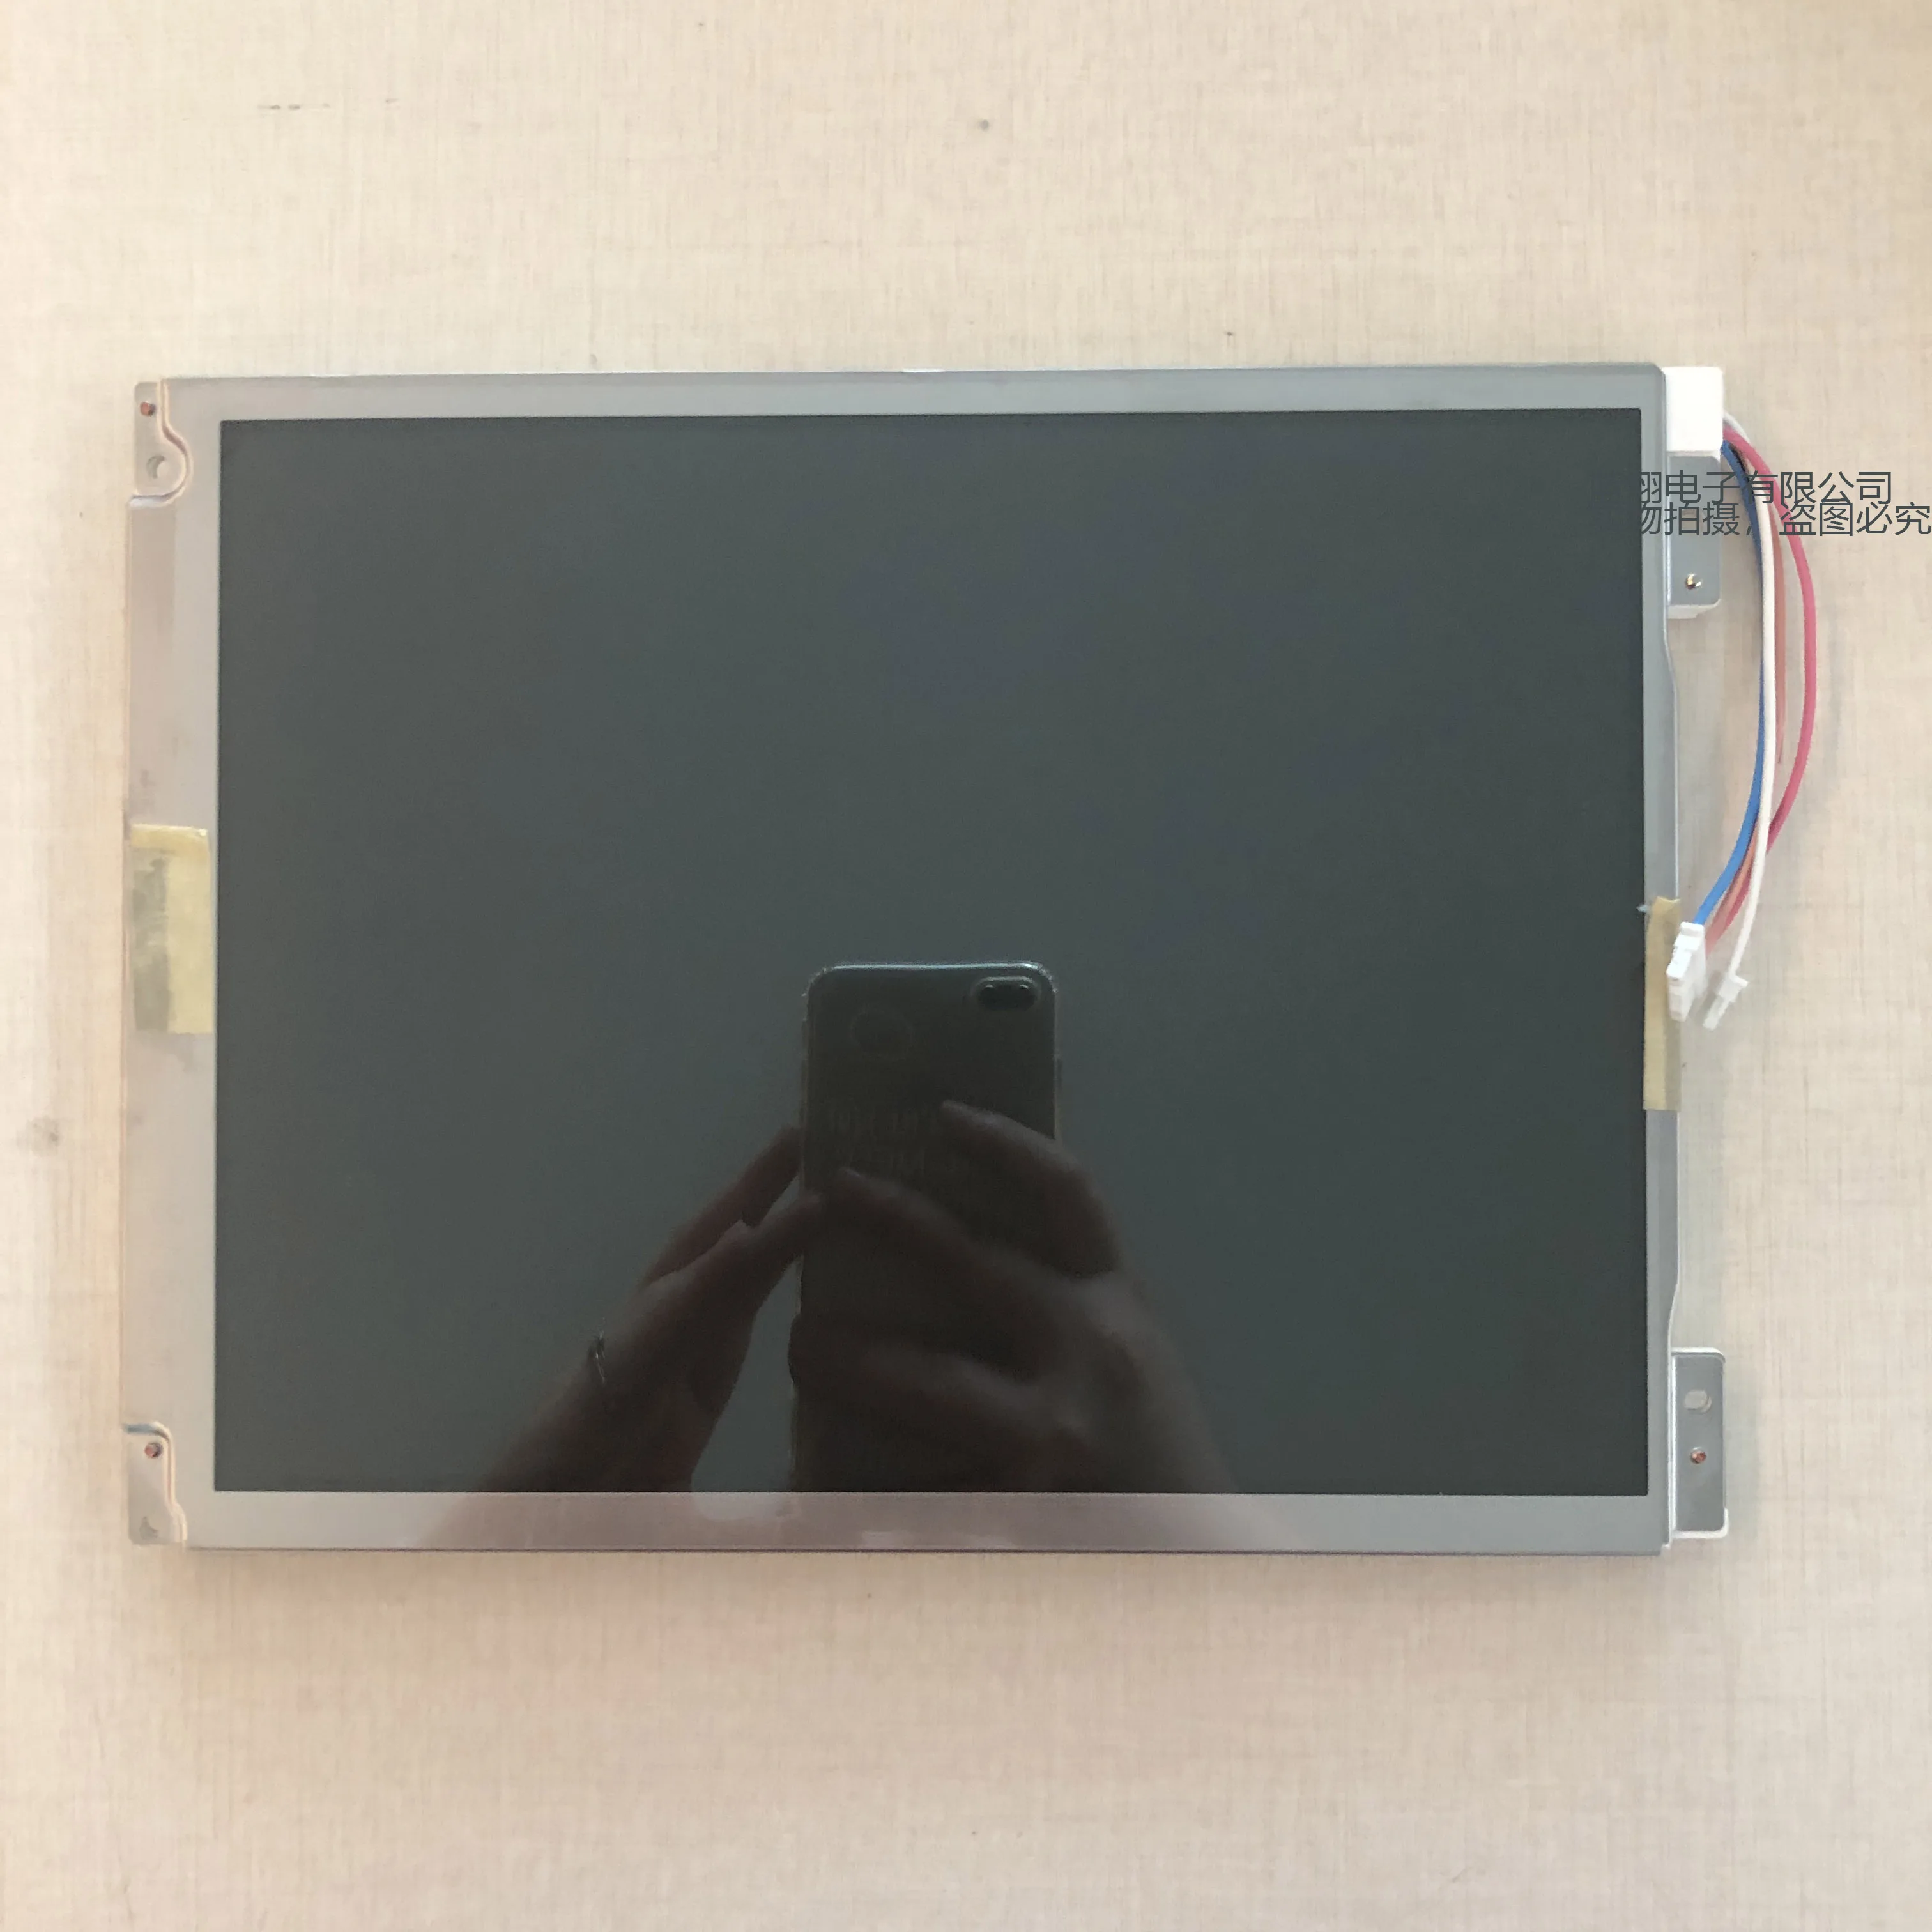 For 10.4inch LQ104V1DG71 LQ0DAS1698 LCD Screen Display Panel Fully Tested for 10 4inch nl6448ac33 29 tft 640 480 fully tested lcd screen display panel